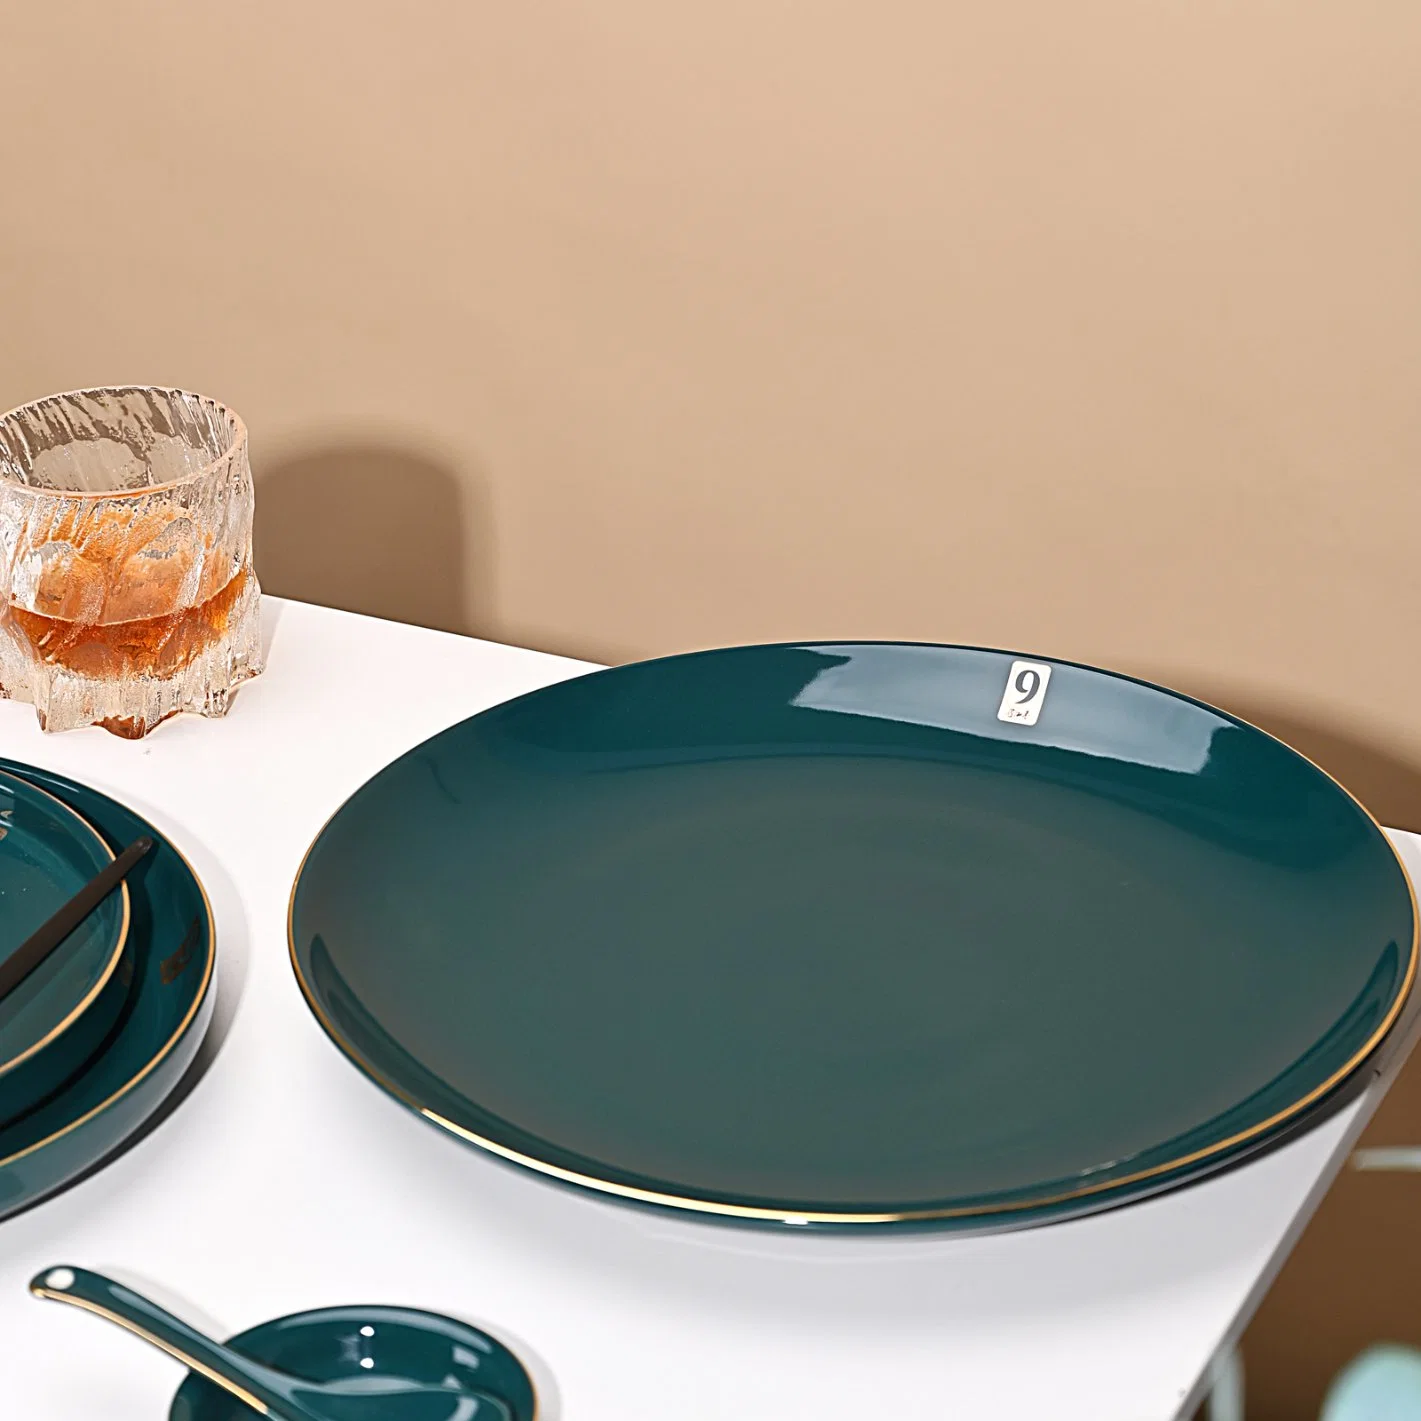 Ceramic Dinner Plates Dinnerware Set Dishes Luxury Green Food Large Dinner Plate with No. 9 Gold Rim Decal for Restaurant Hotel